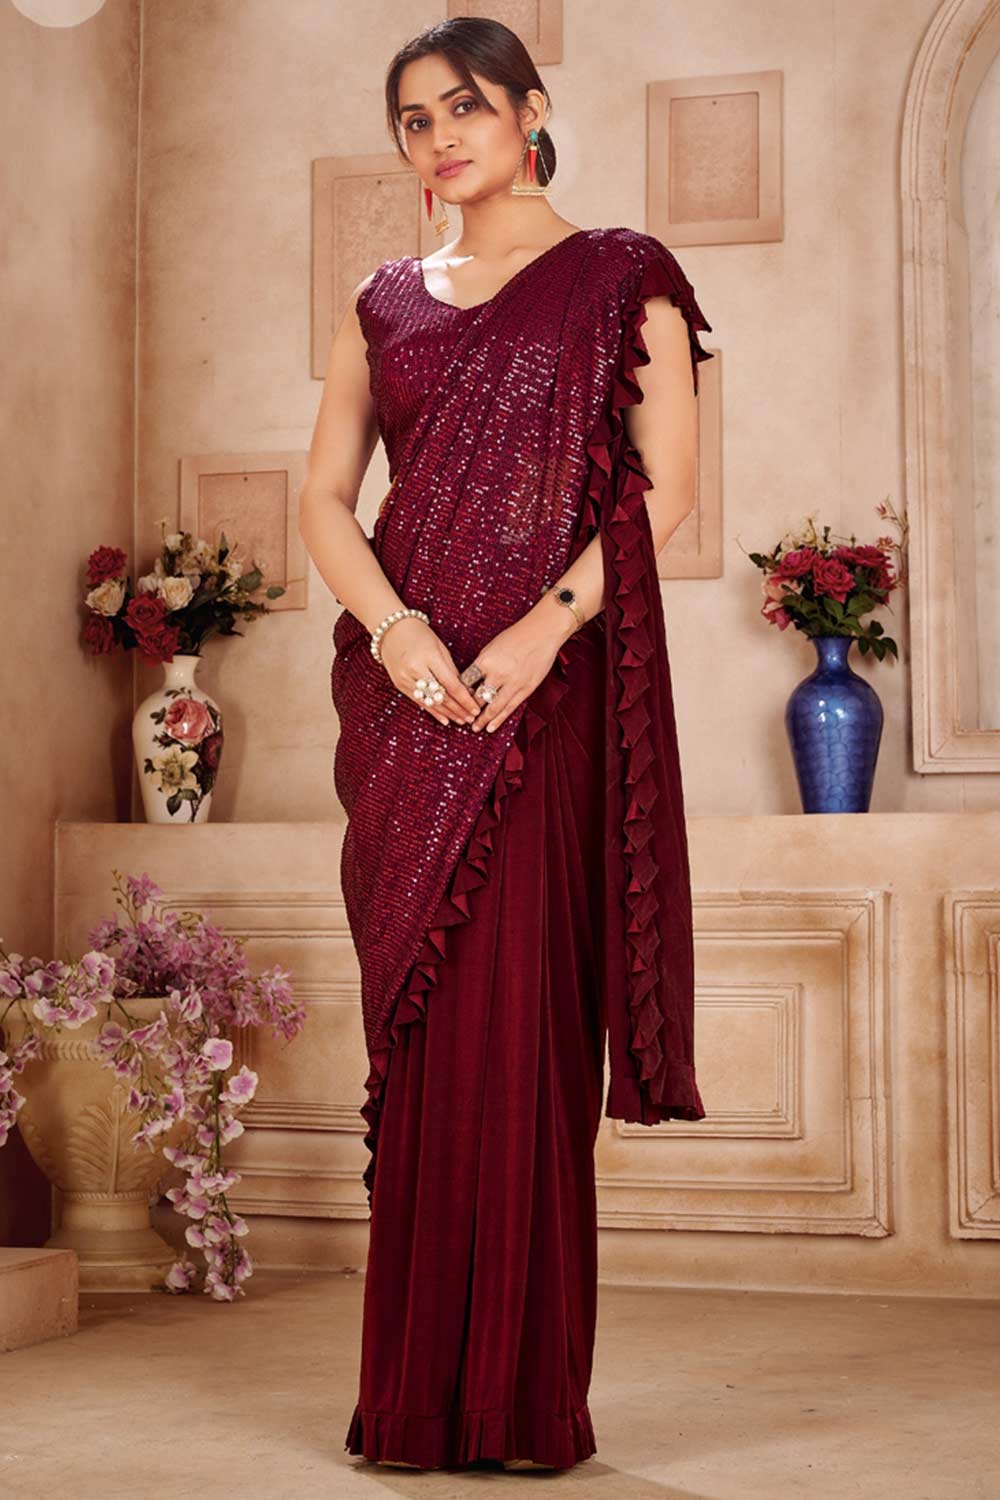 Buy Maroon Lycra sequins work With Frill laceReady To Wear Saree Online - KARMAPLACE